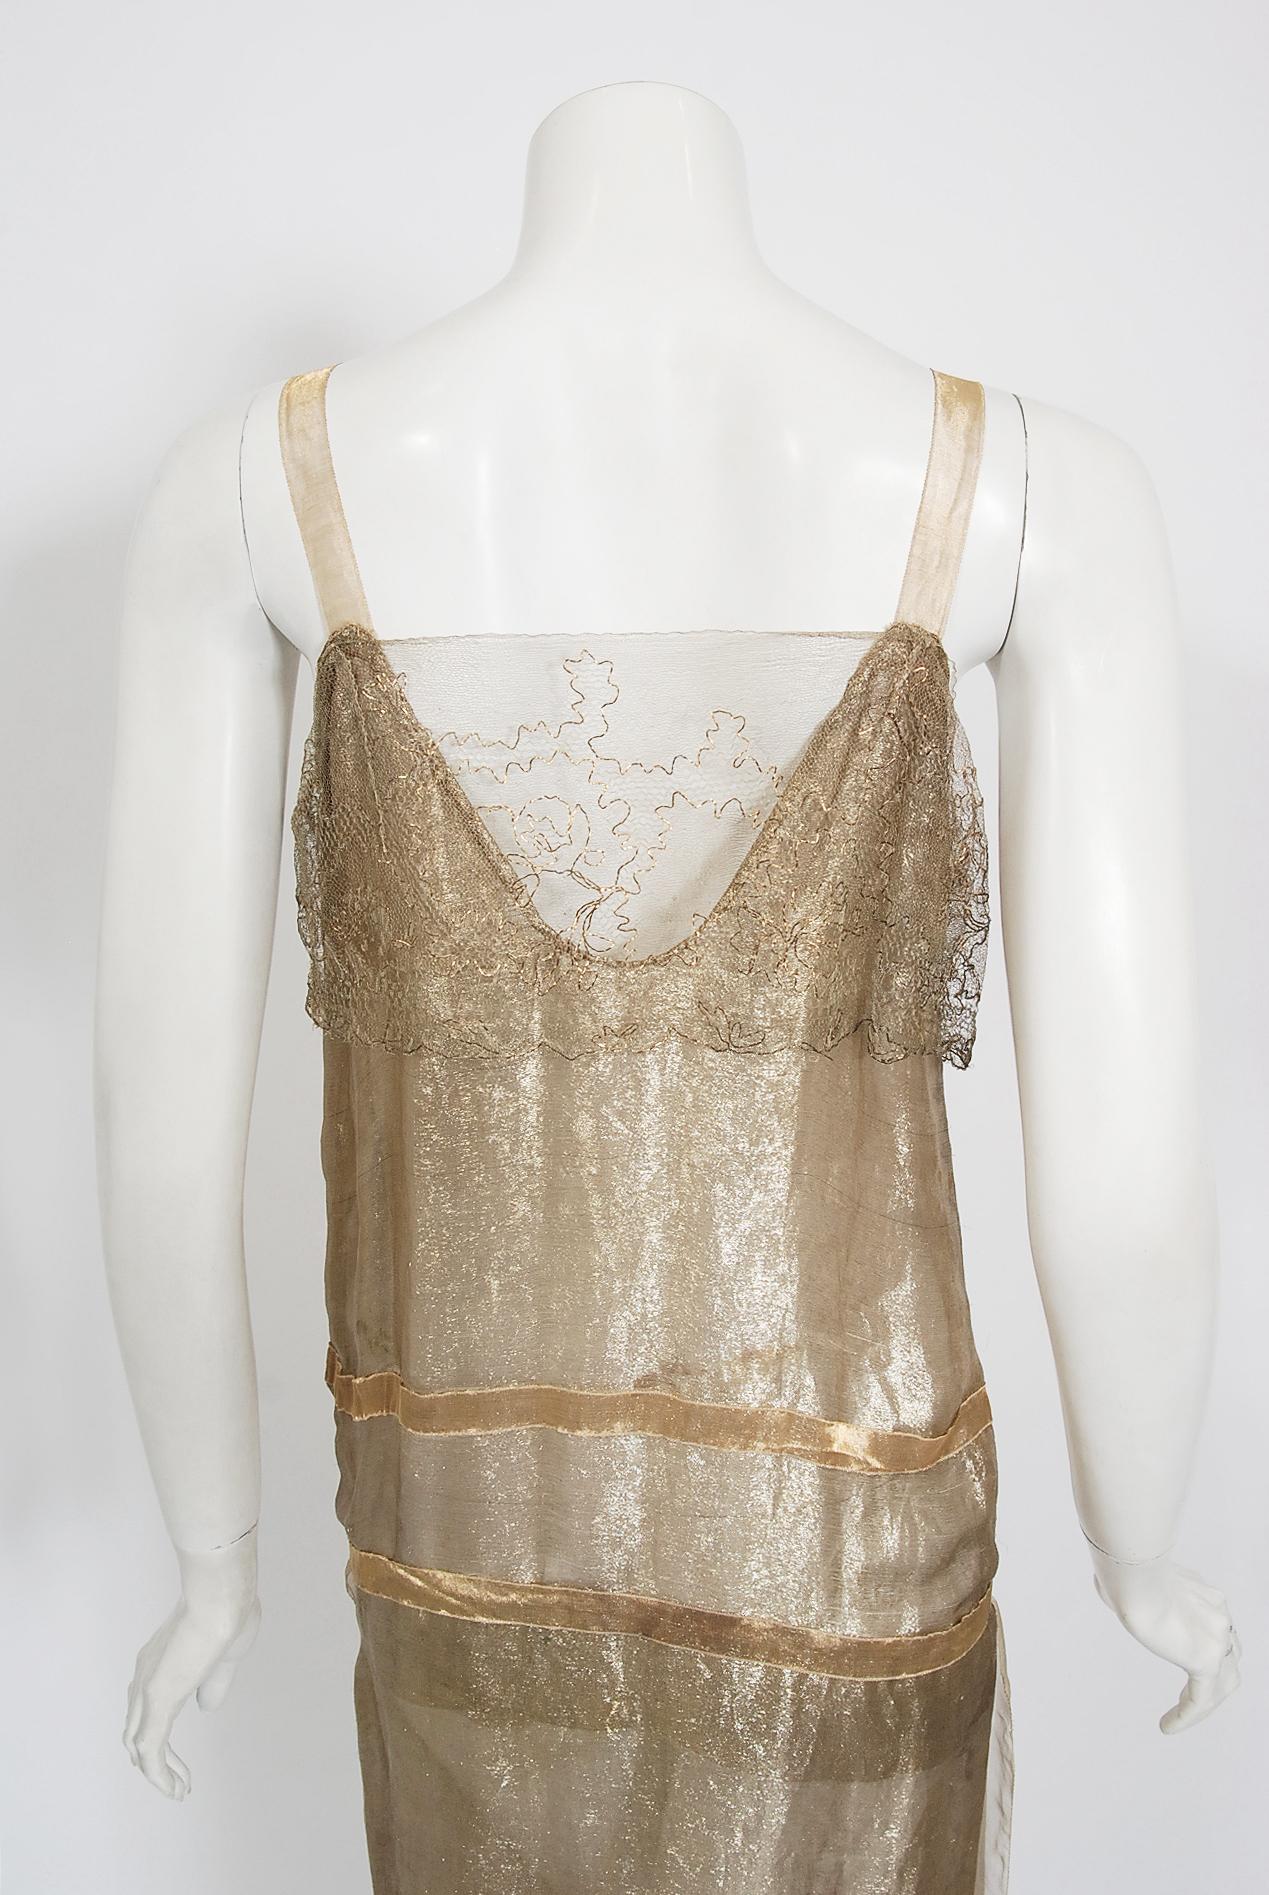 Vintage 1920's French Couture Metallic Gold Embroidered Lamé Draped Dress 3